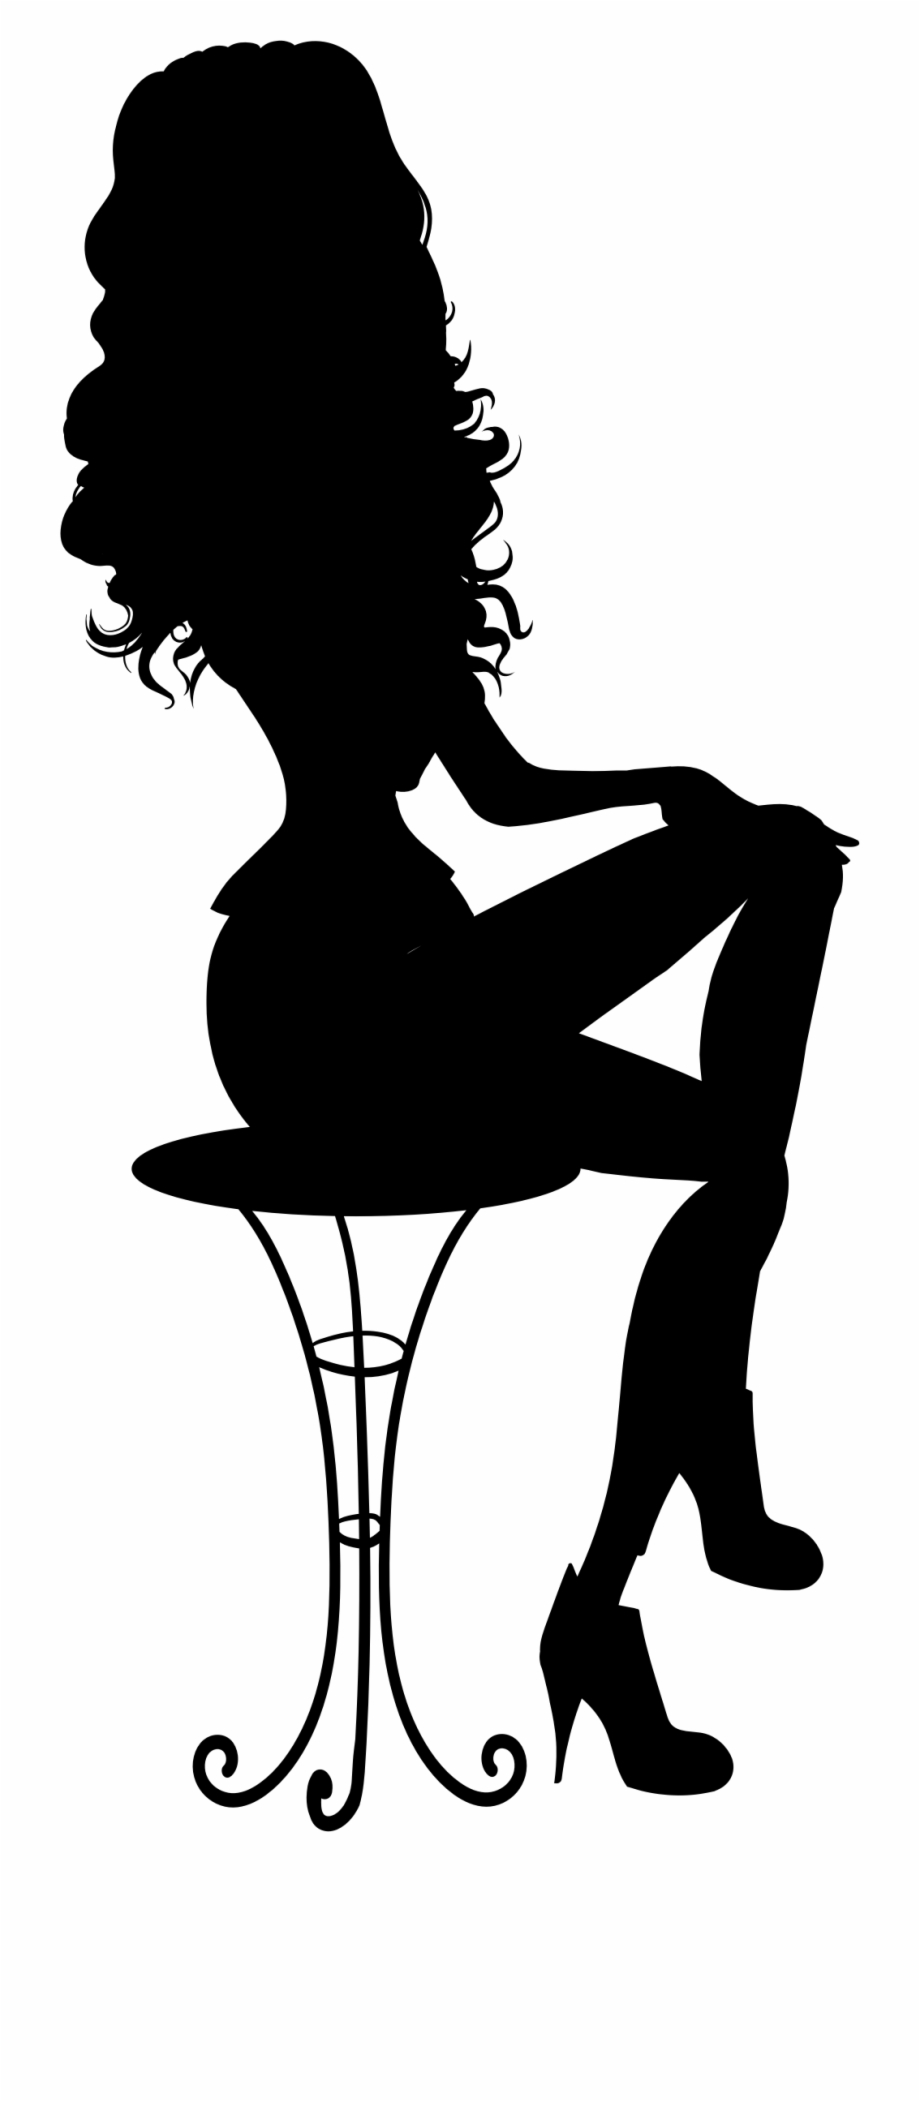 lady sitting silhouette png
